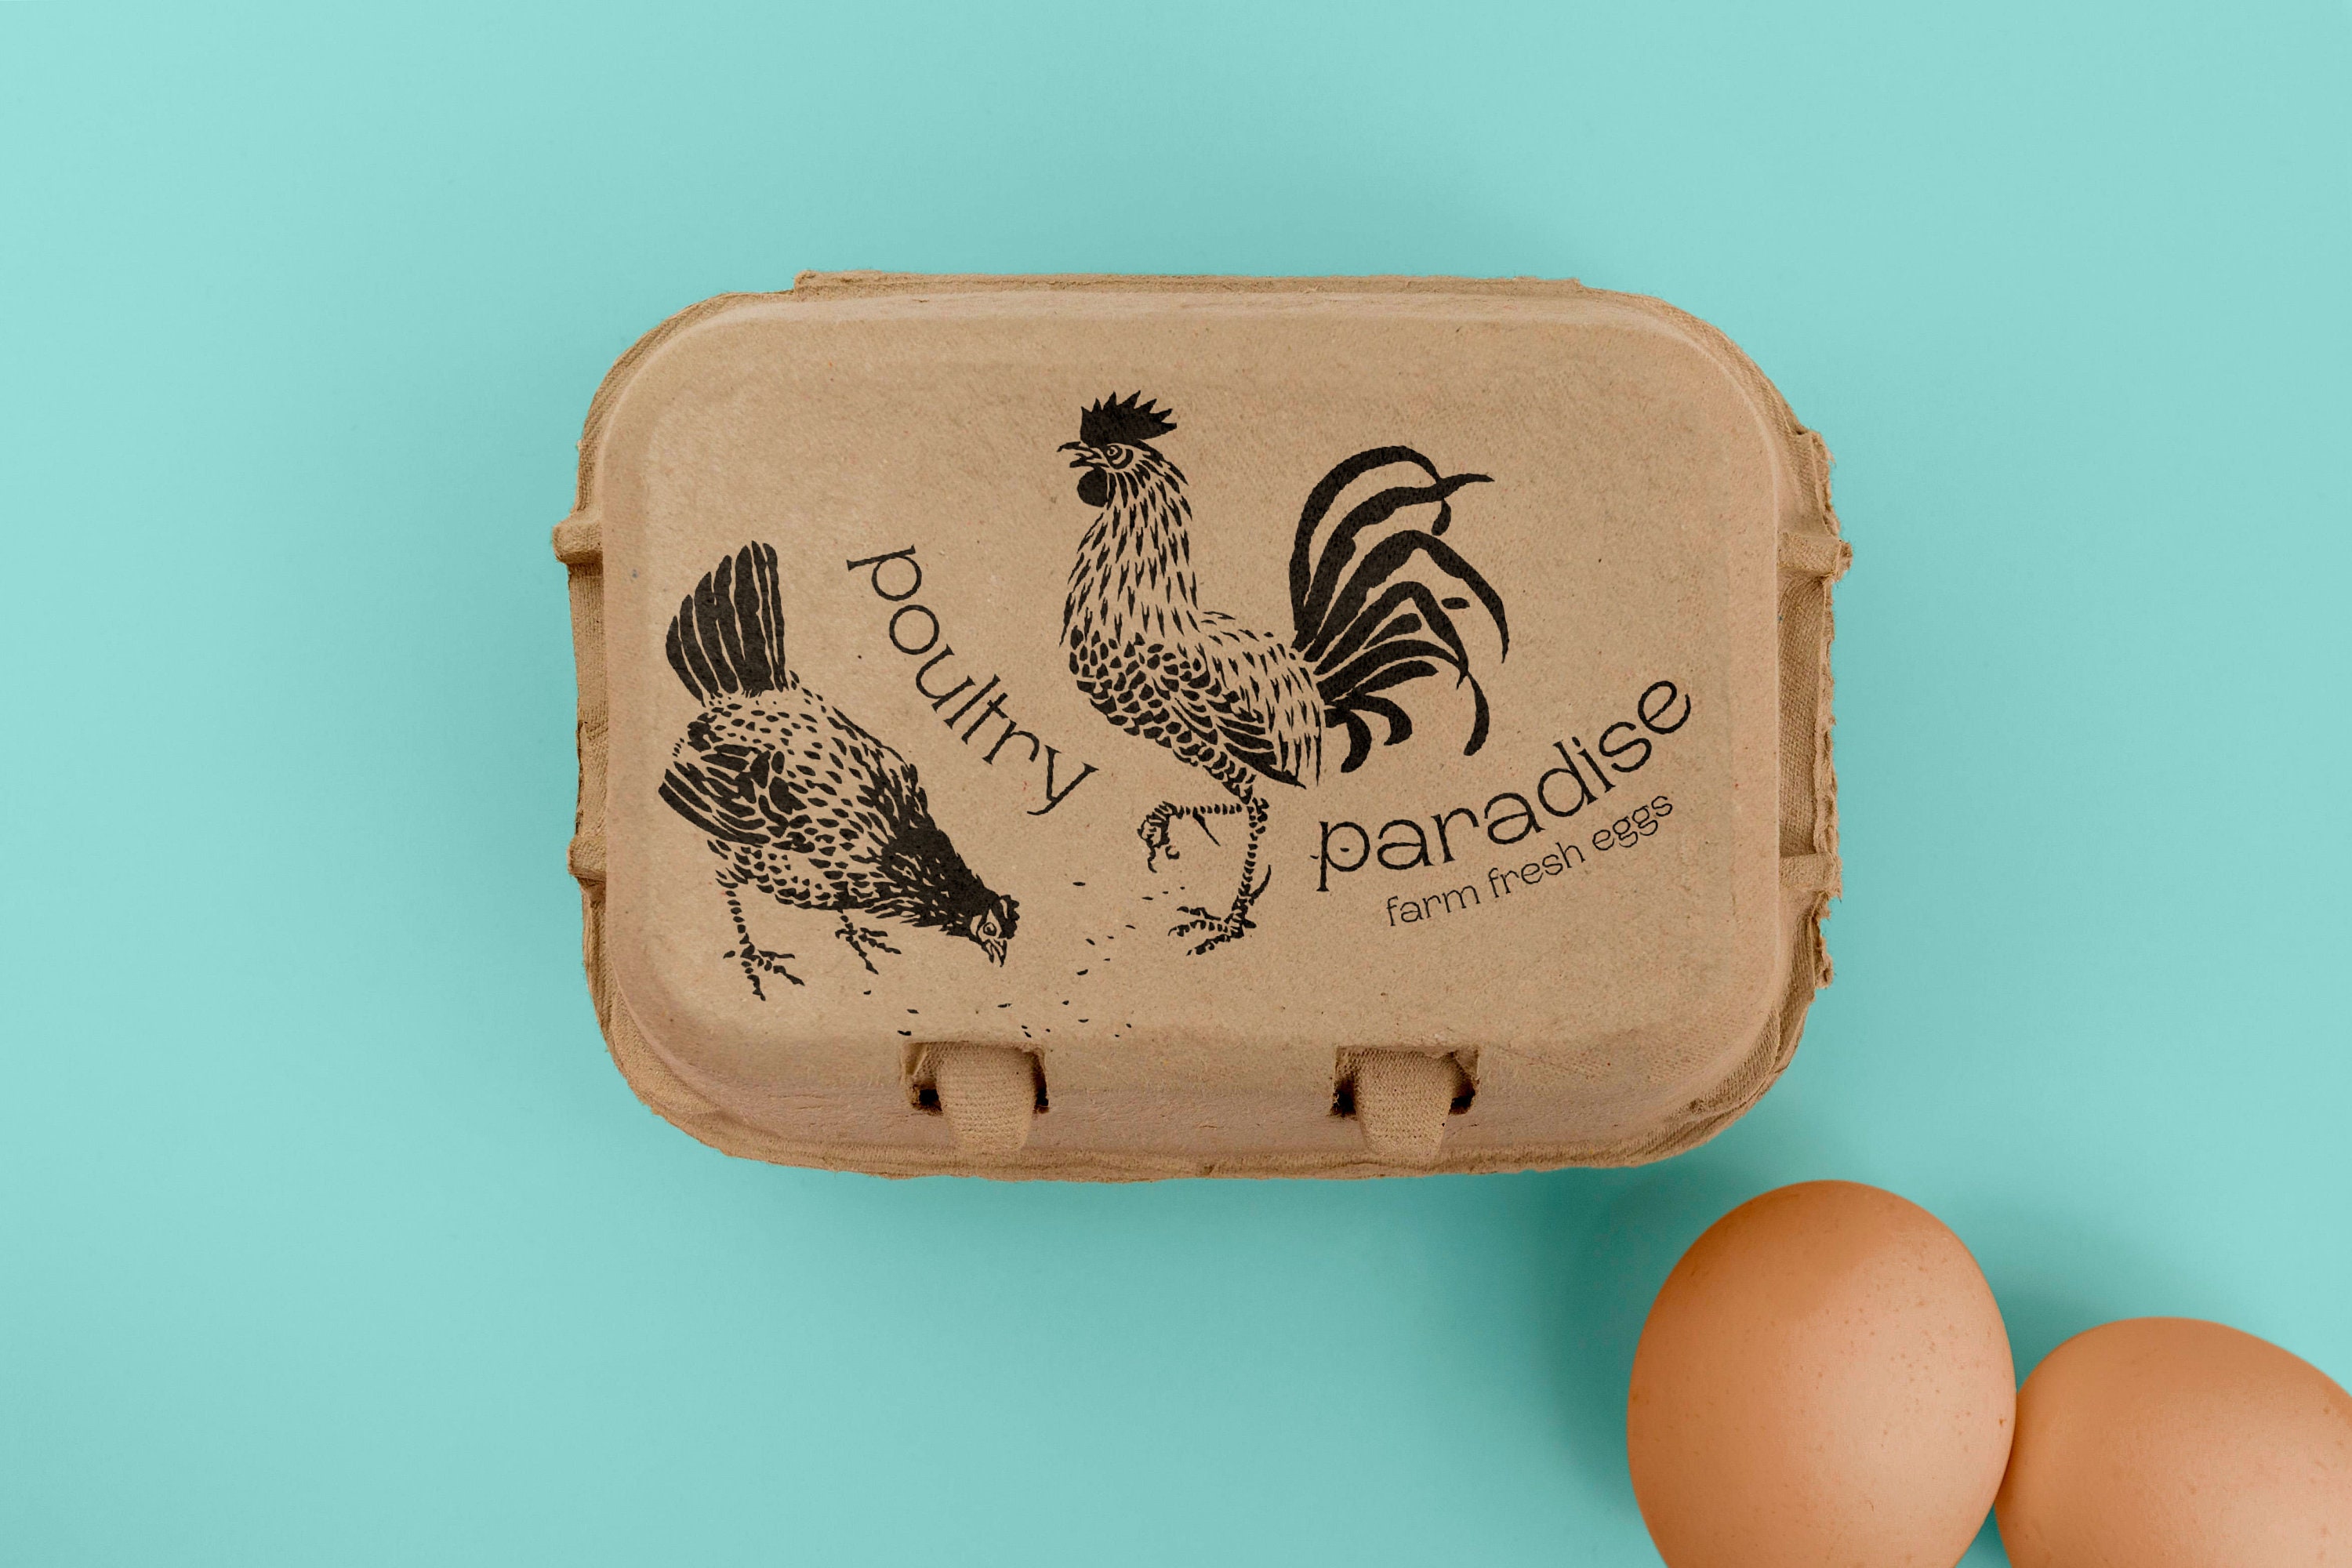 Fresh Eggs Collected Date Stamp Chicken Eggs Date Gathered Stamp Hand  Gathered Egg Stamp Chicken Stamp Fresh Eggs Stamp 